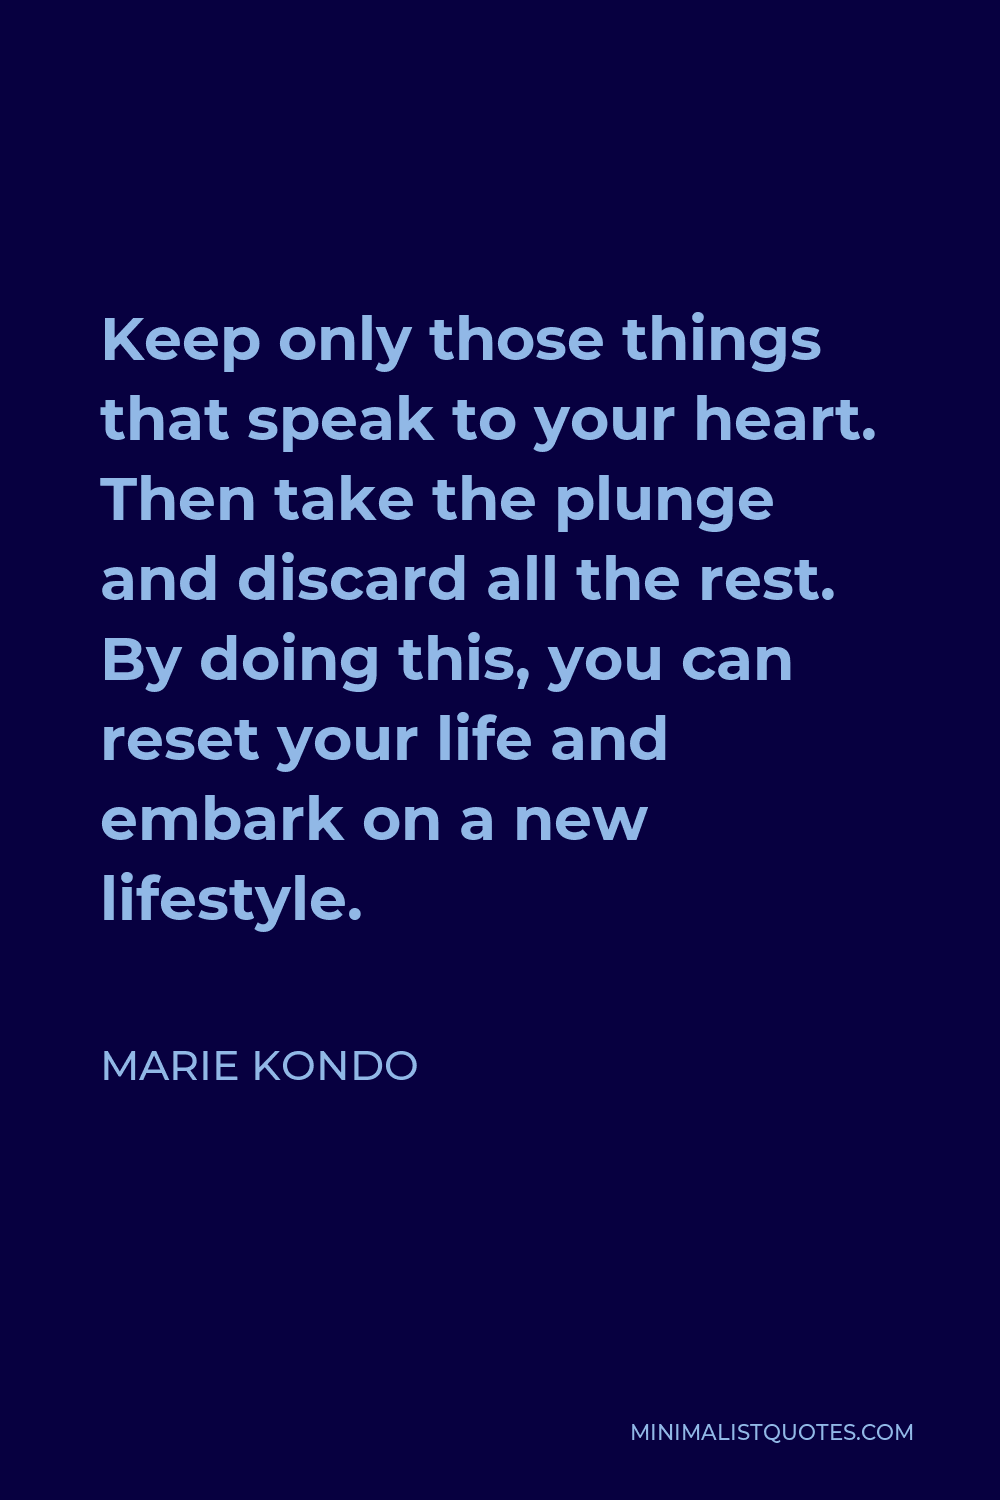 Marie Kondo Quote - Keep only those things that speak to your heart. Then take the plunge and discard all the rest. By doing this, you can reset your life and embark on a new lifestyle.